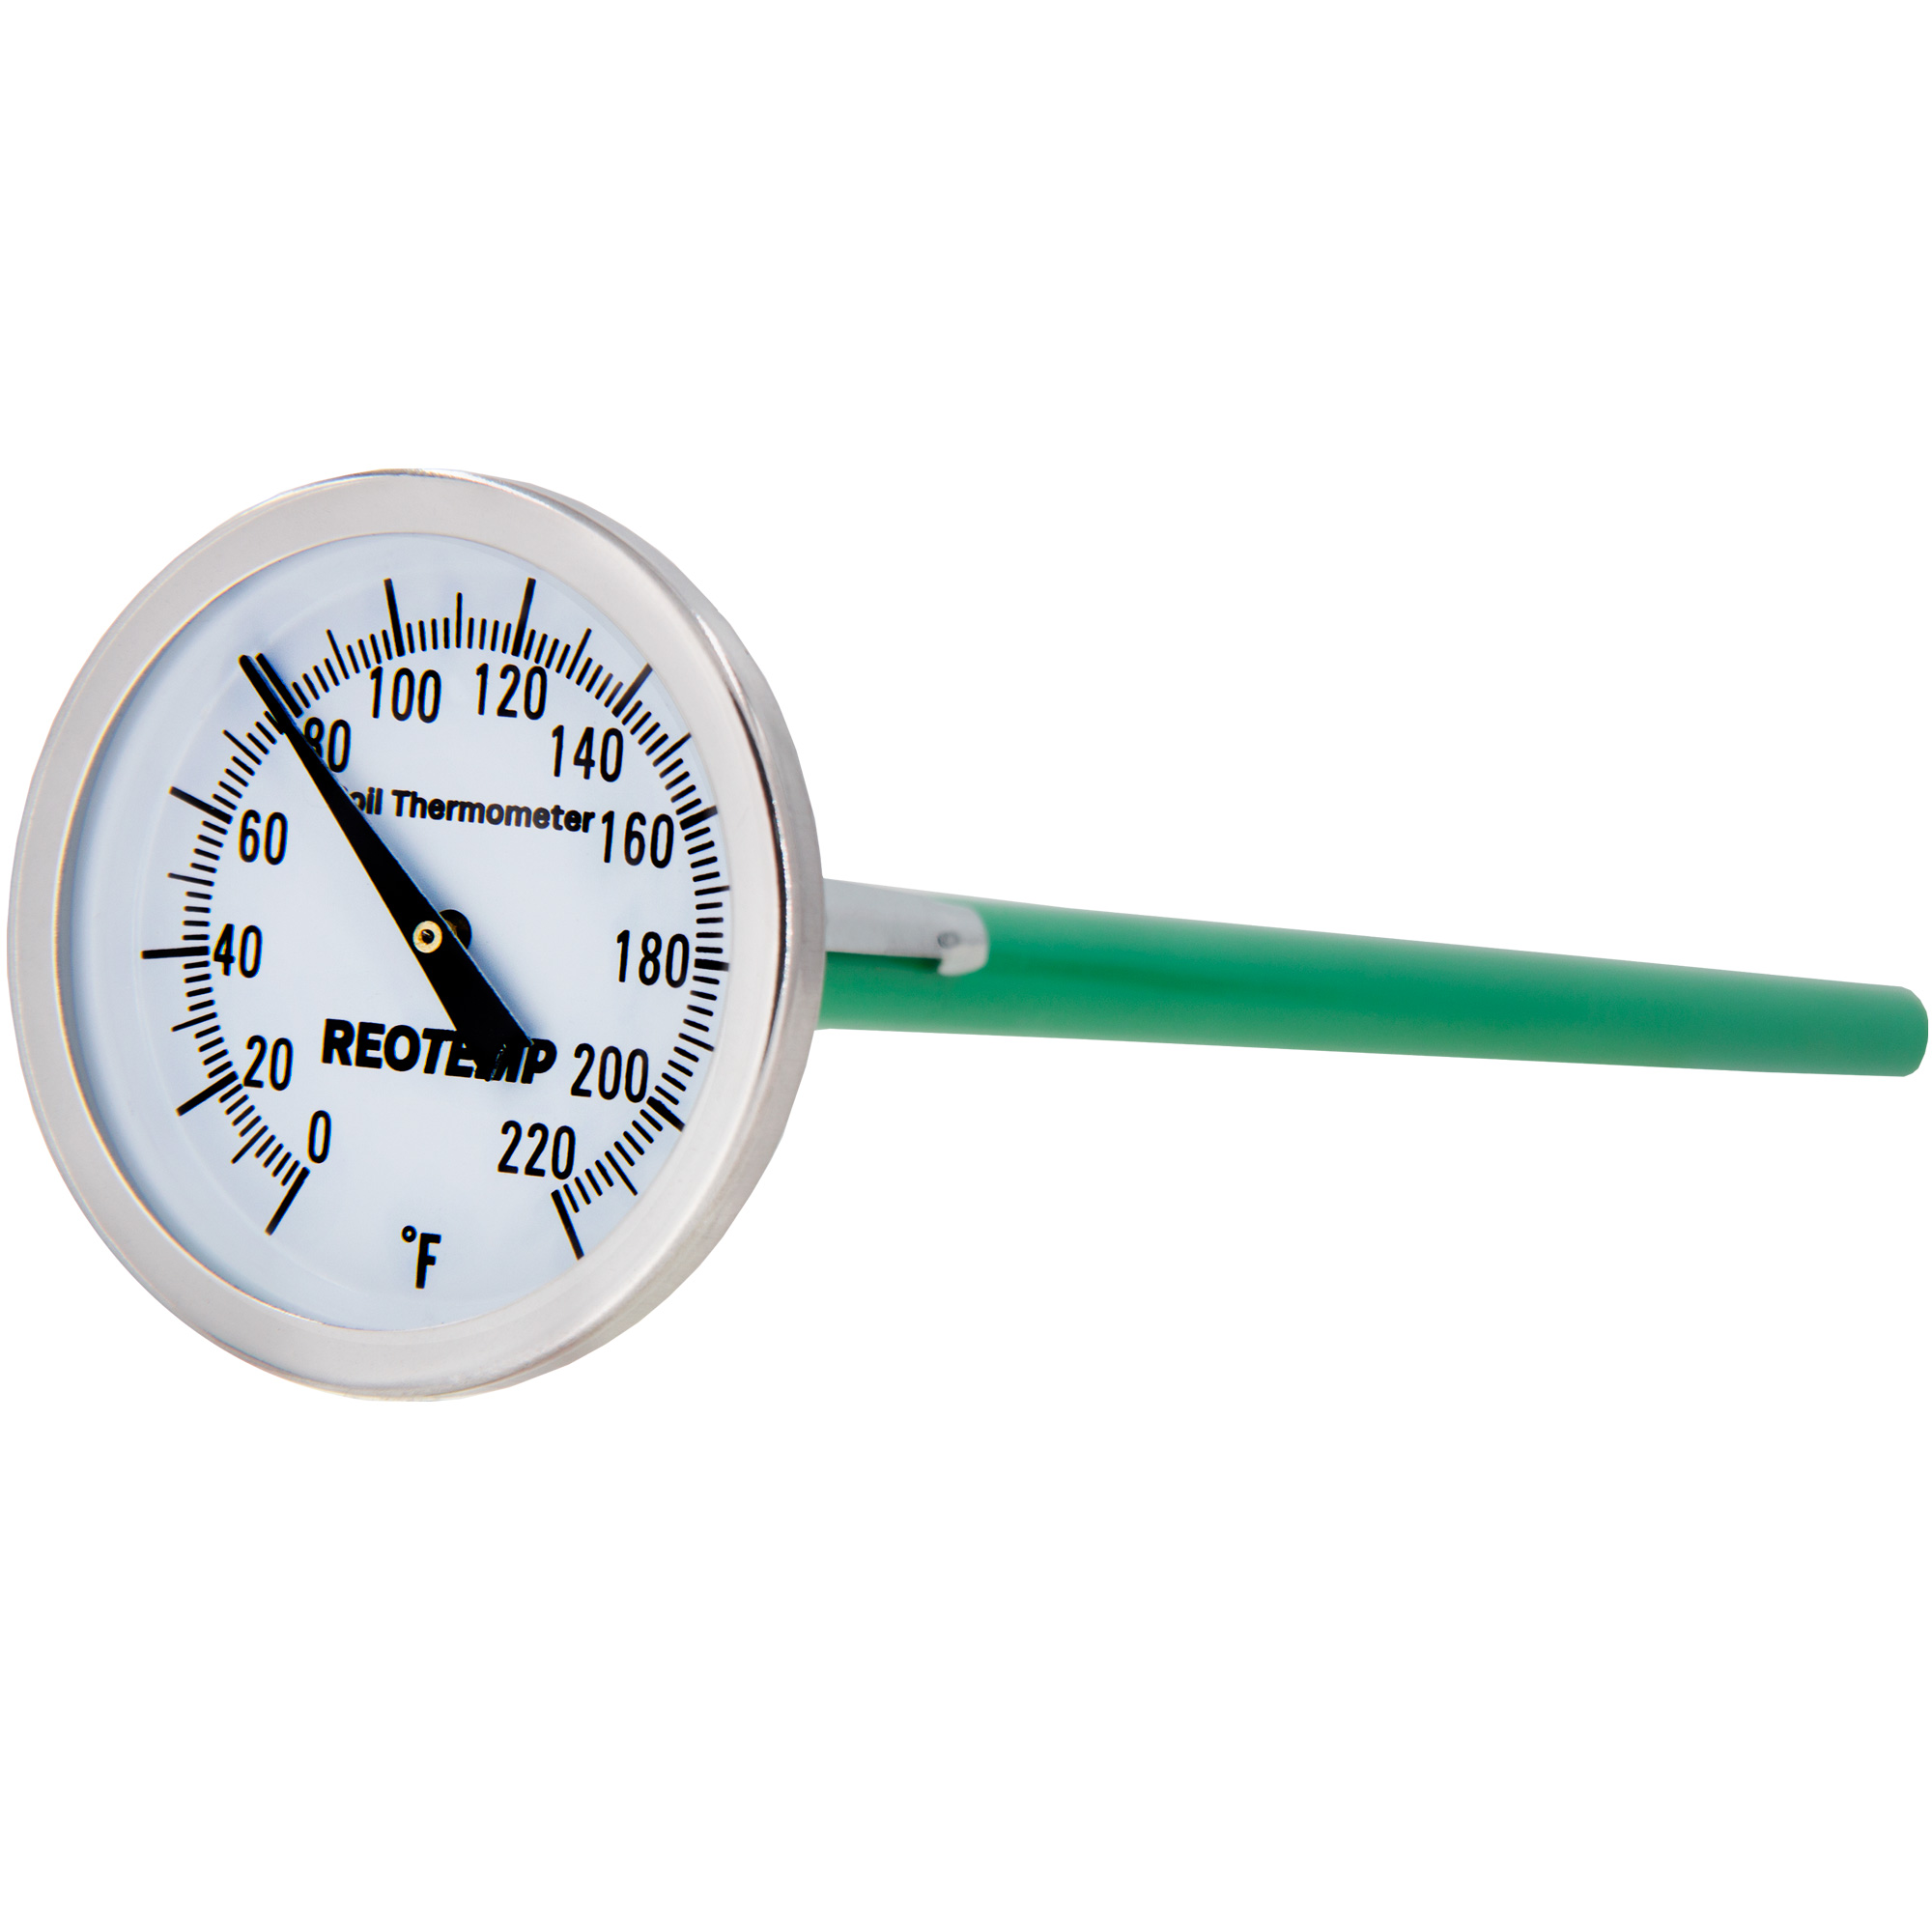 Long Stem Compost Soil Thermometer - Fast Response Stainless Steel 16 Inch  - Fahrenheit and Celsius - Includes Protective Sheath and Composting Guide